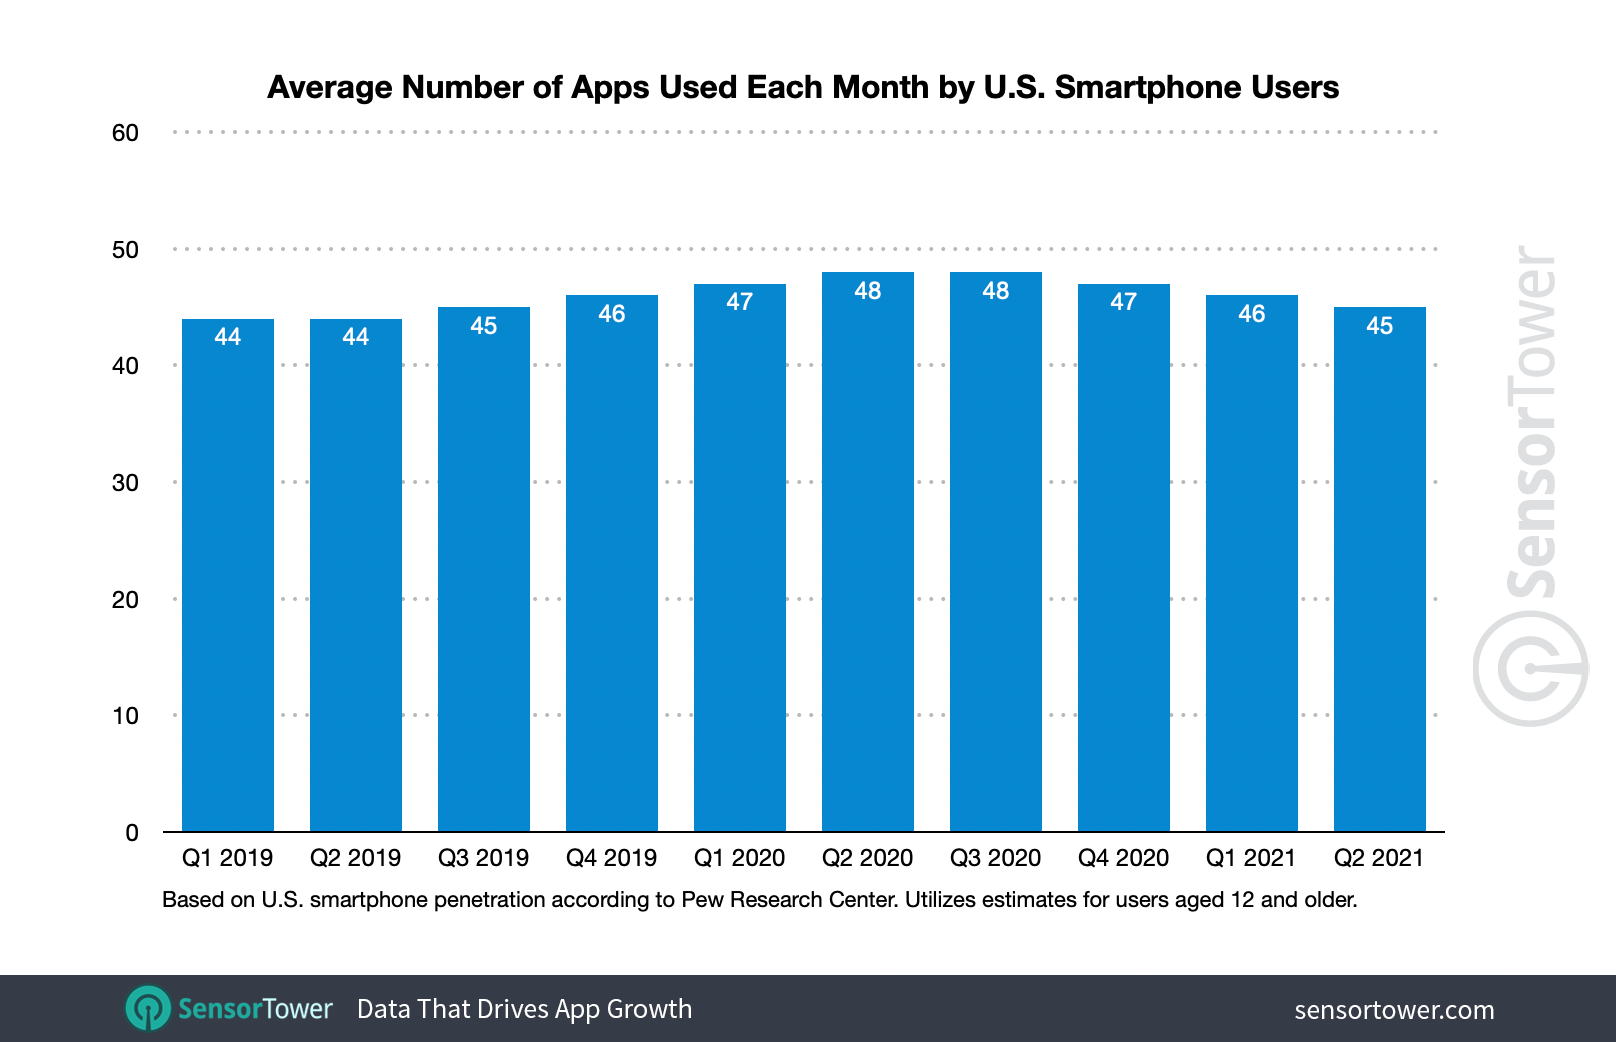 Quarterly average app usage by U.S. smartphone users aged 12 and above